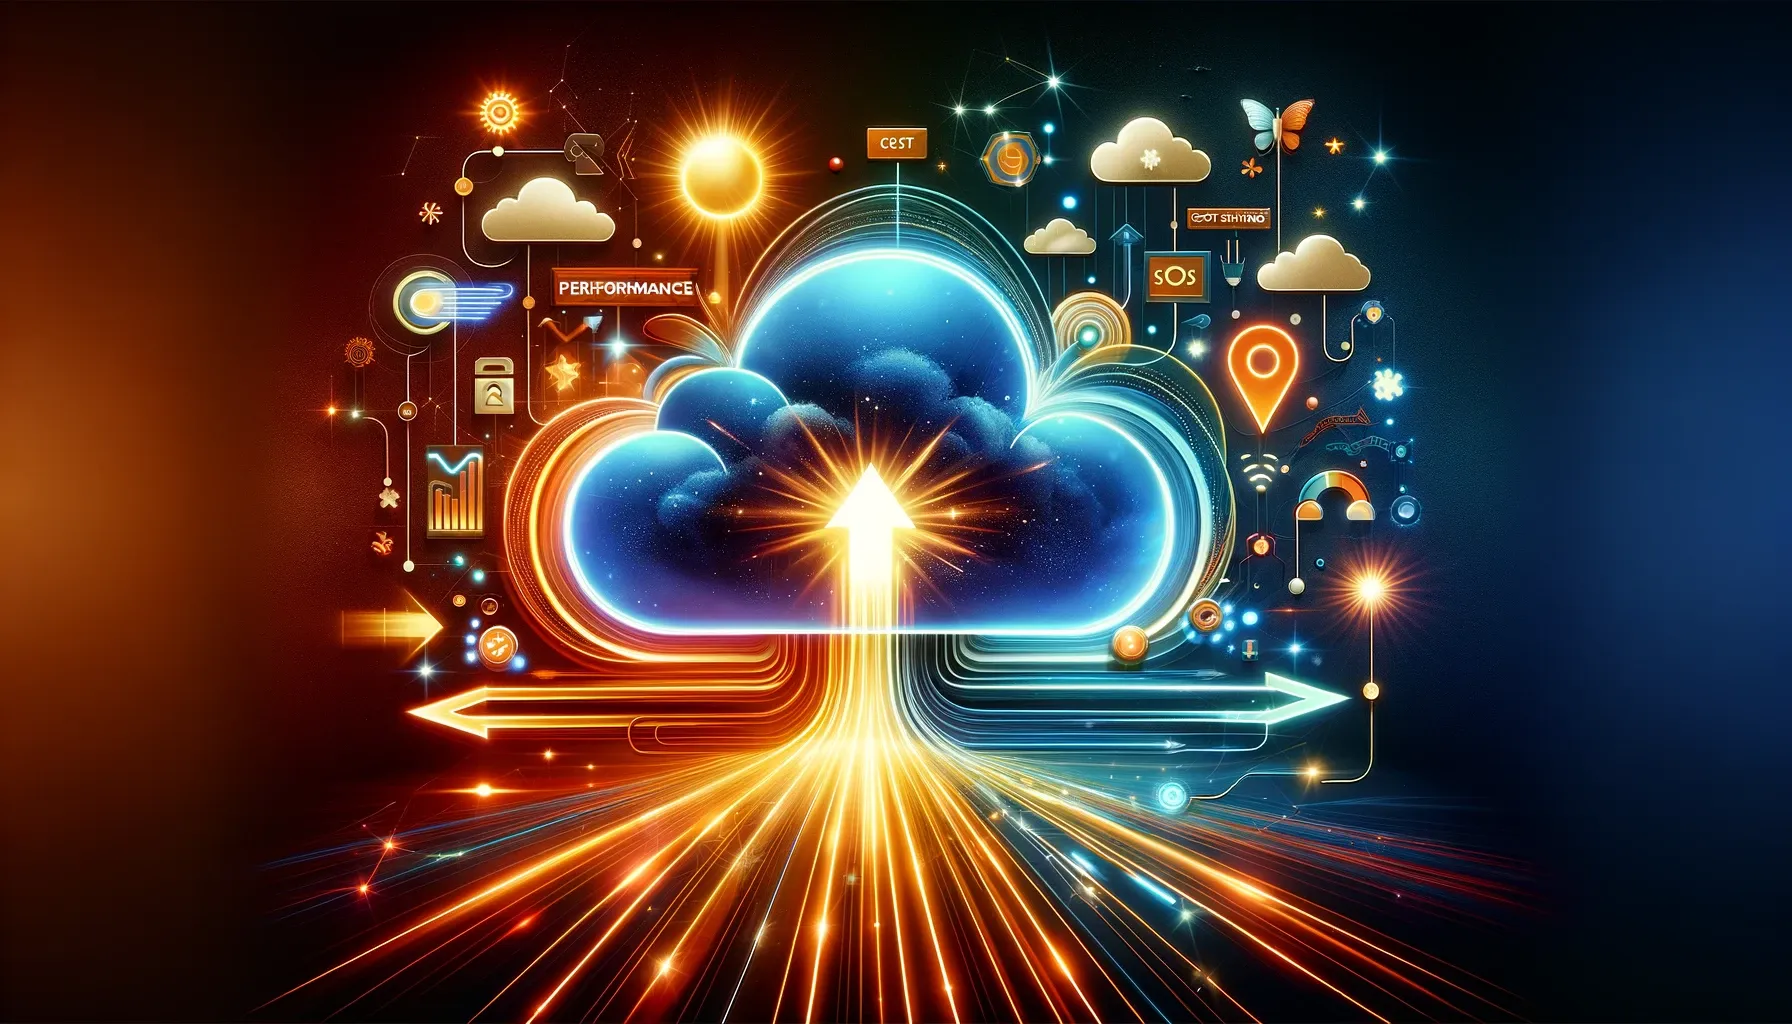 Arrows connecting a glowing cloud to a network grid on a colorful background.